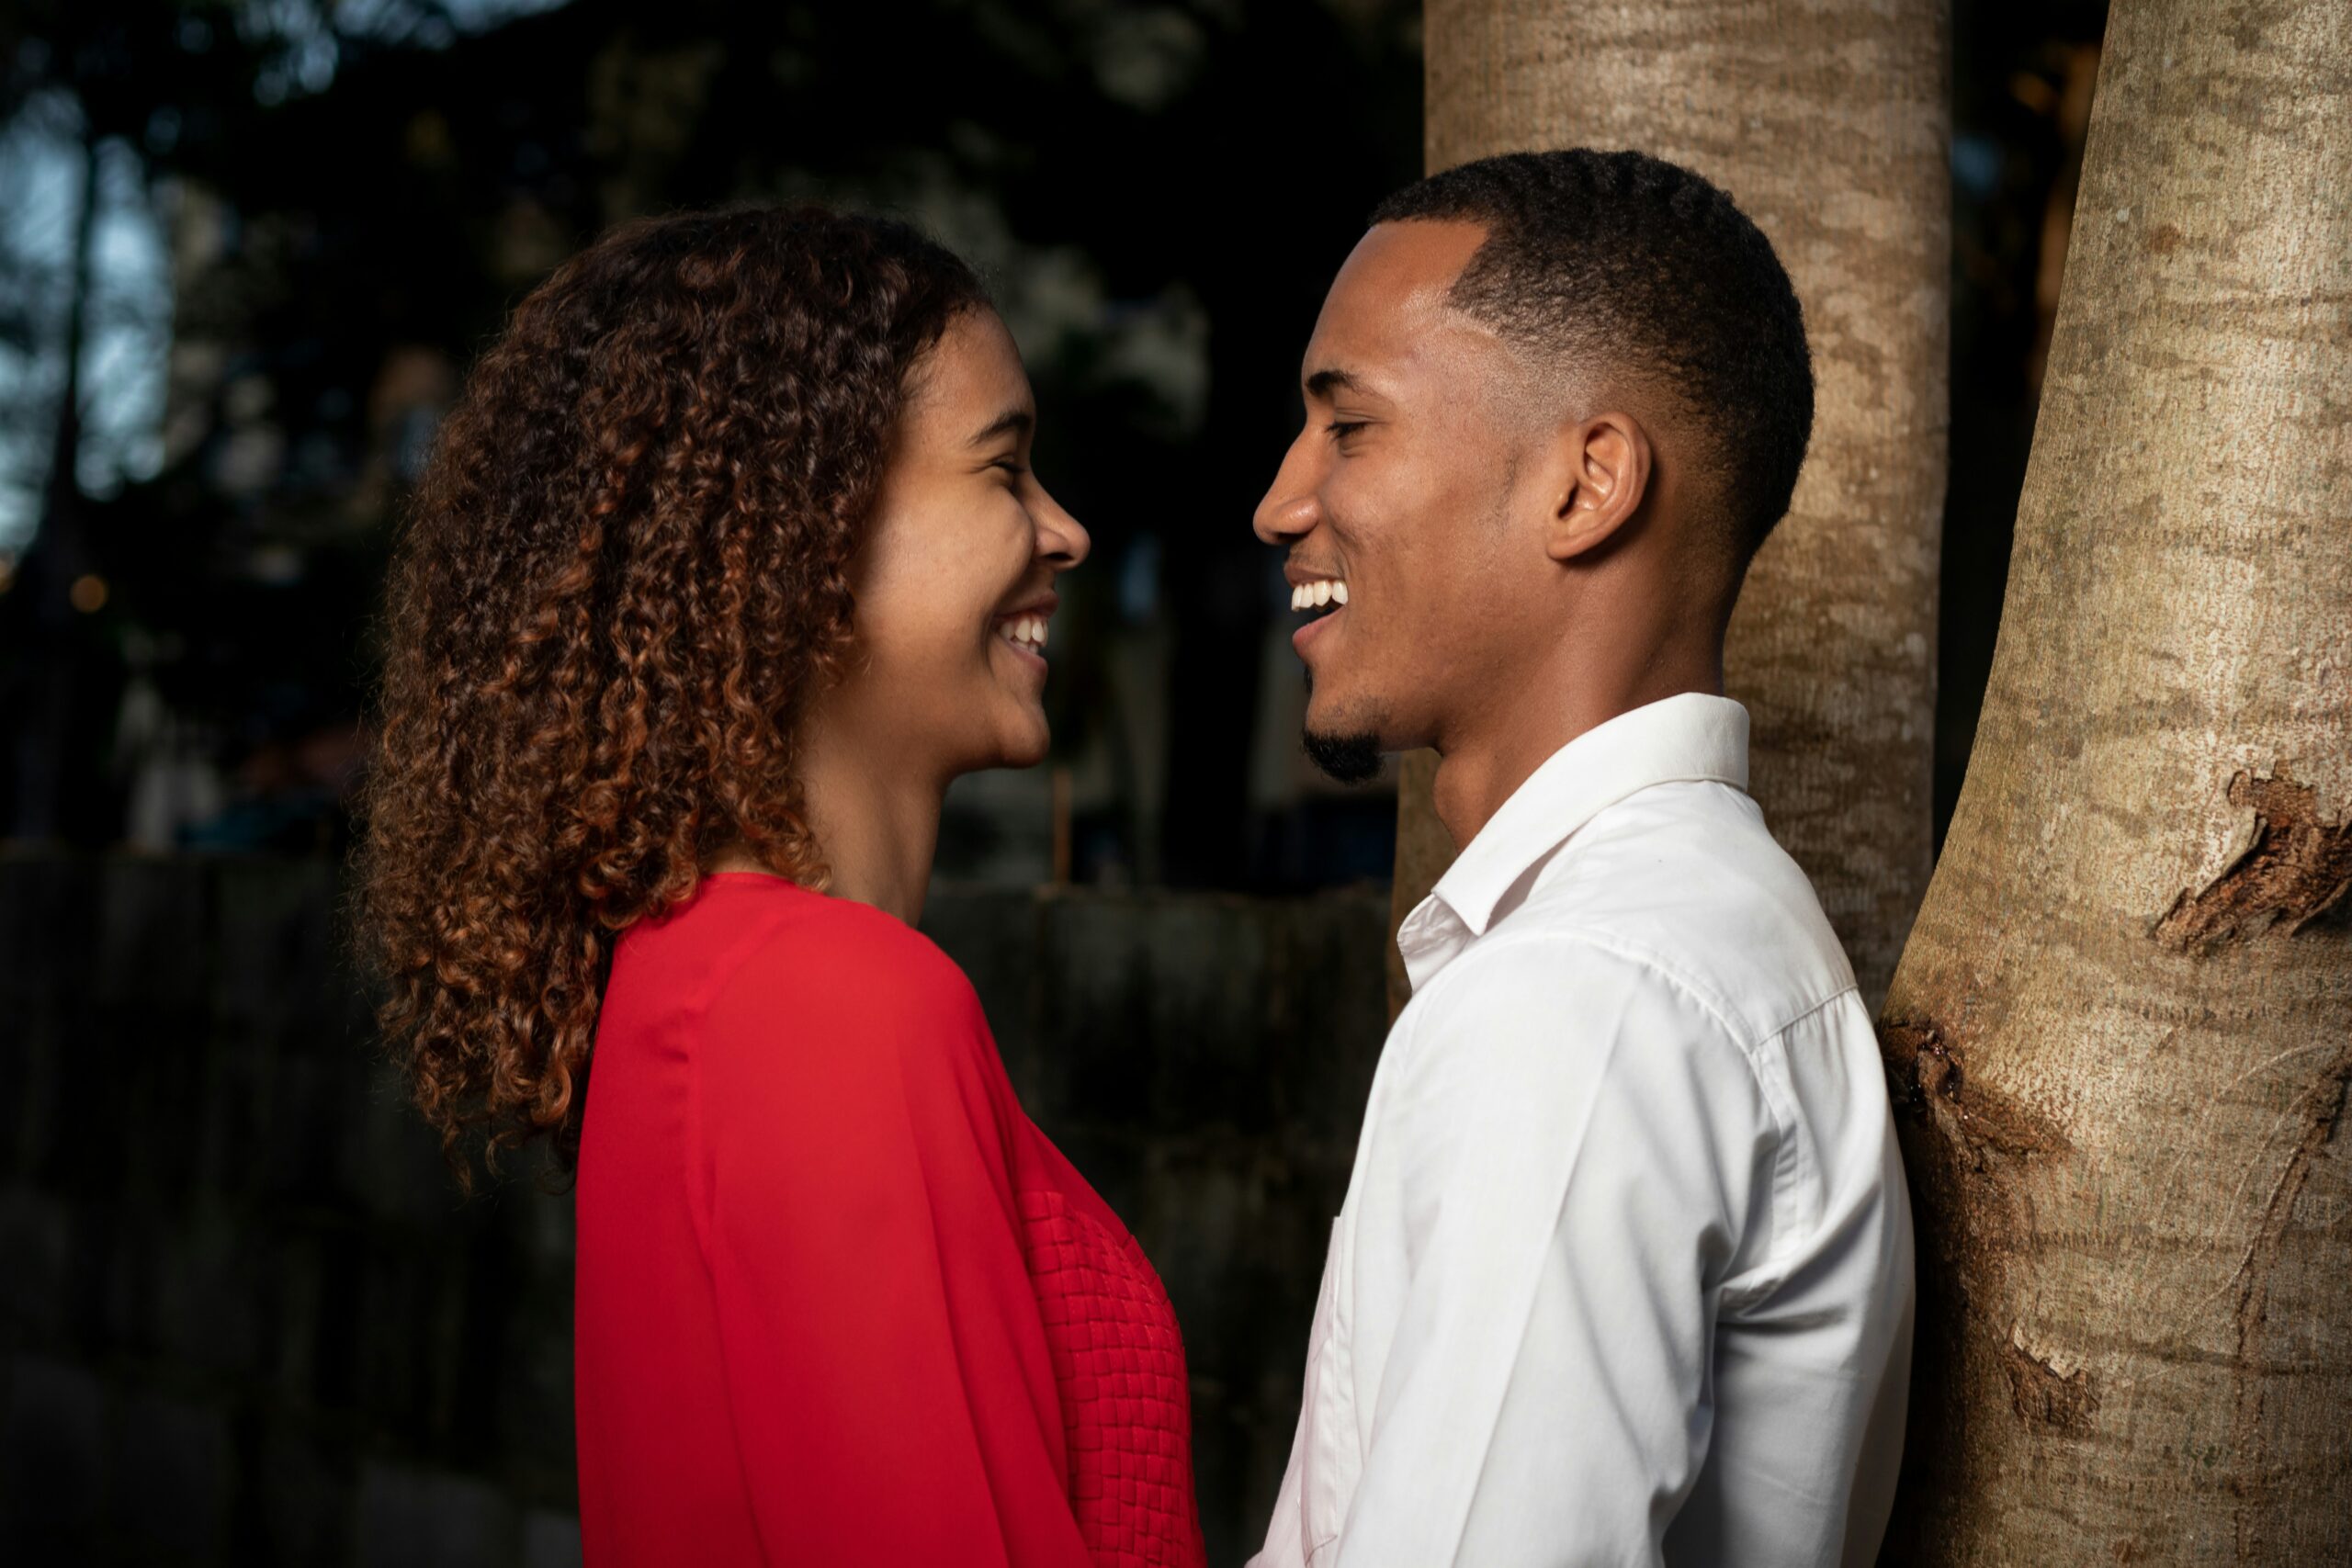 Black man and woman, looking at each other with love and smiles in Manhattan. Sexual attraction can grow in the right relationships.